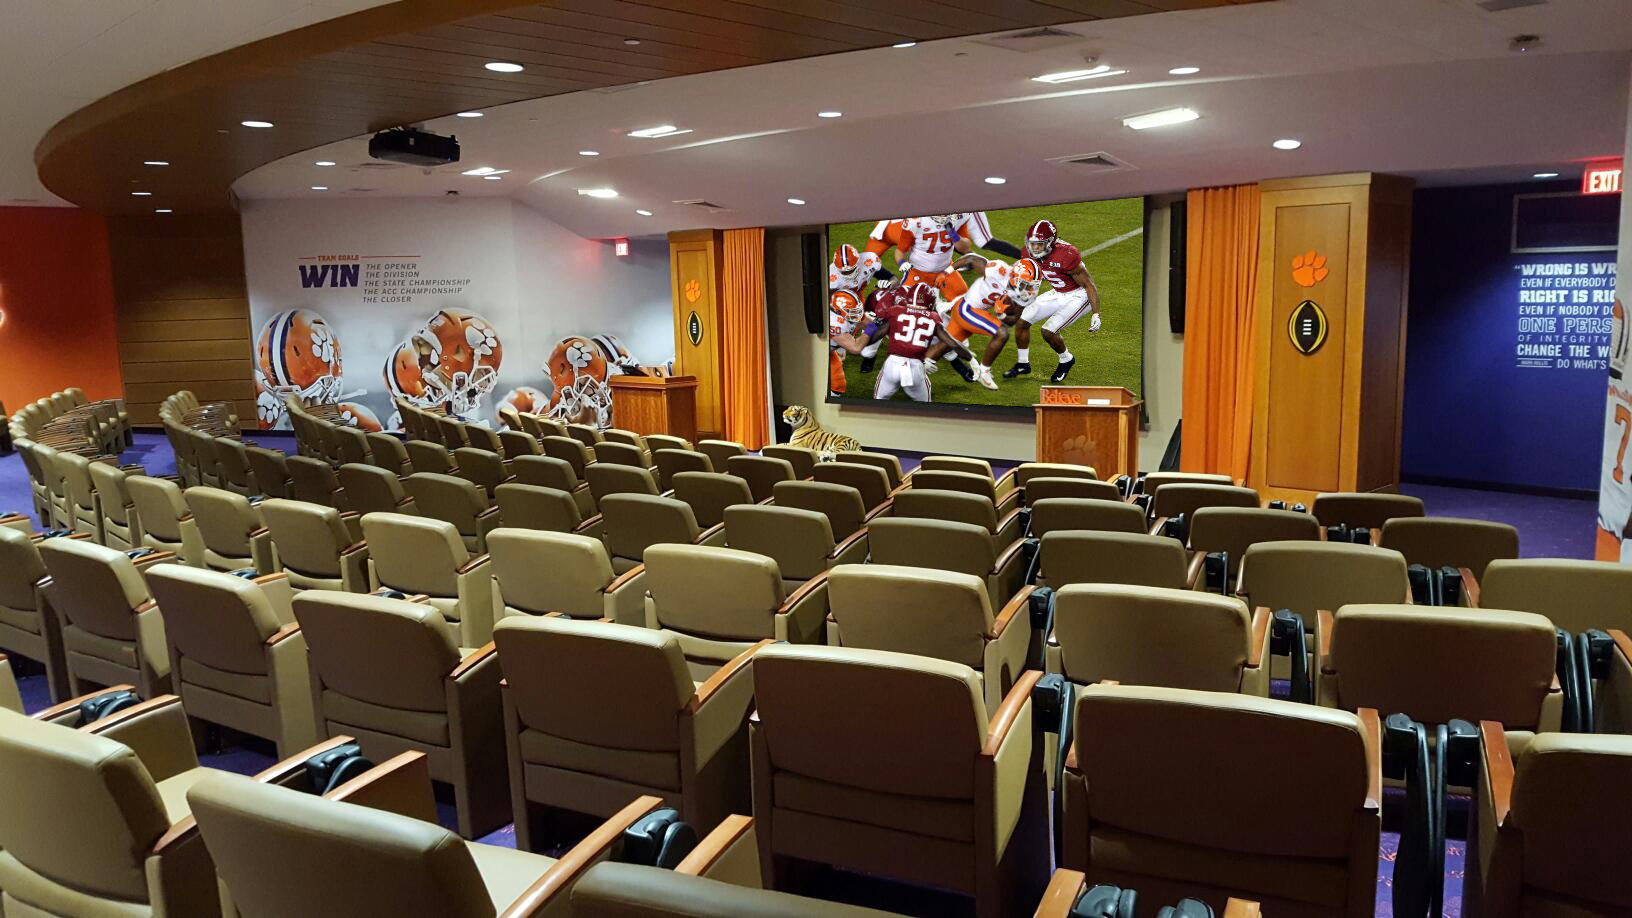 Clemson University, Allen N. Reeves Football Complex, Clemson Tigers, HOK, Training Facility, Football Operations Center, ACC Network, AV Solutions, AV Technology, Projection Systems, IPTV, Distributed TV, LED, Digital Signage, Broadcast Engineering, Broadcast and Production Controls, Infrastructure Cabling, Campus Fiber System, Audio, Lighting, AV Consultant, Owner’s Representative, College Sports, College Football, NCAA Division 1, NCAA Champions, NCAA Championship, Locker Room AV